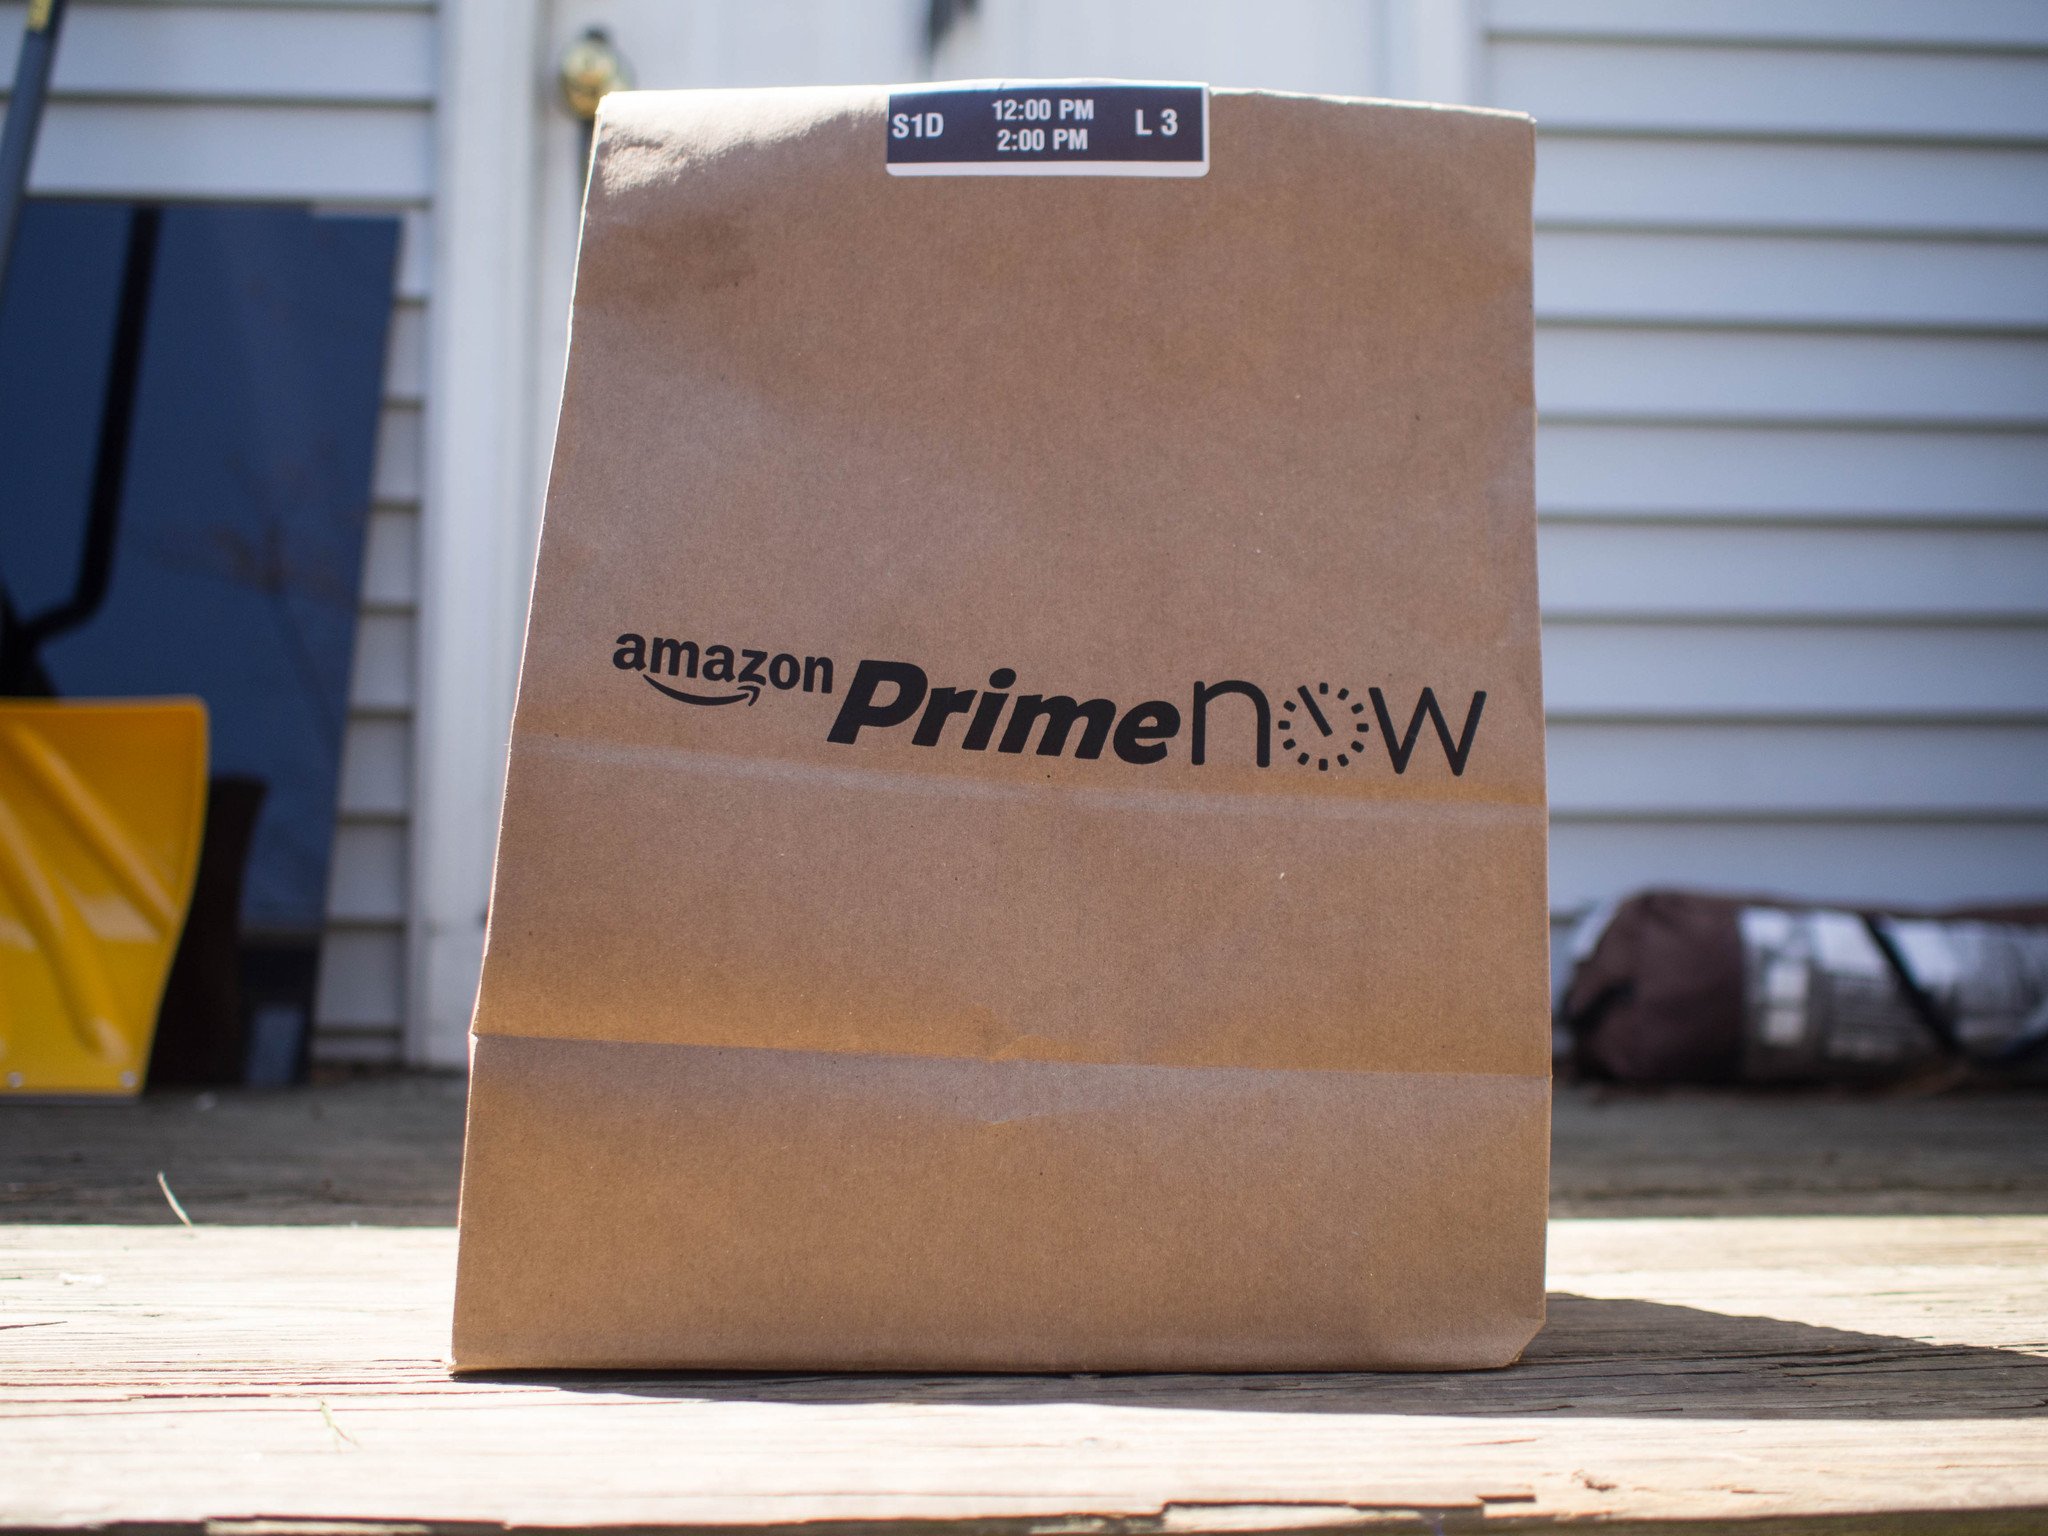 Amazon Prime Now expands to cover more of London | Android Central1200 x 900